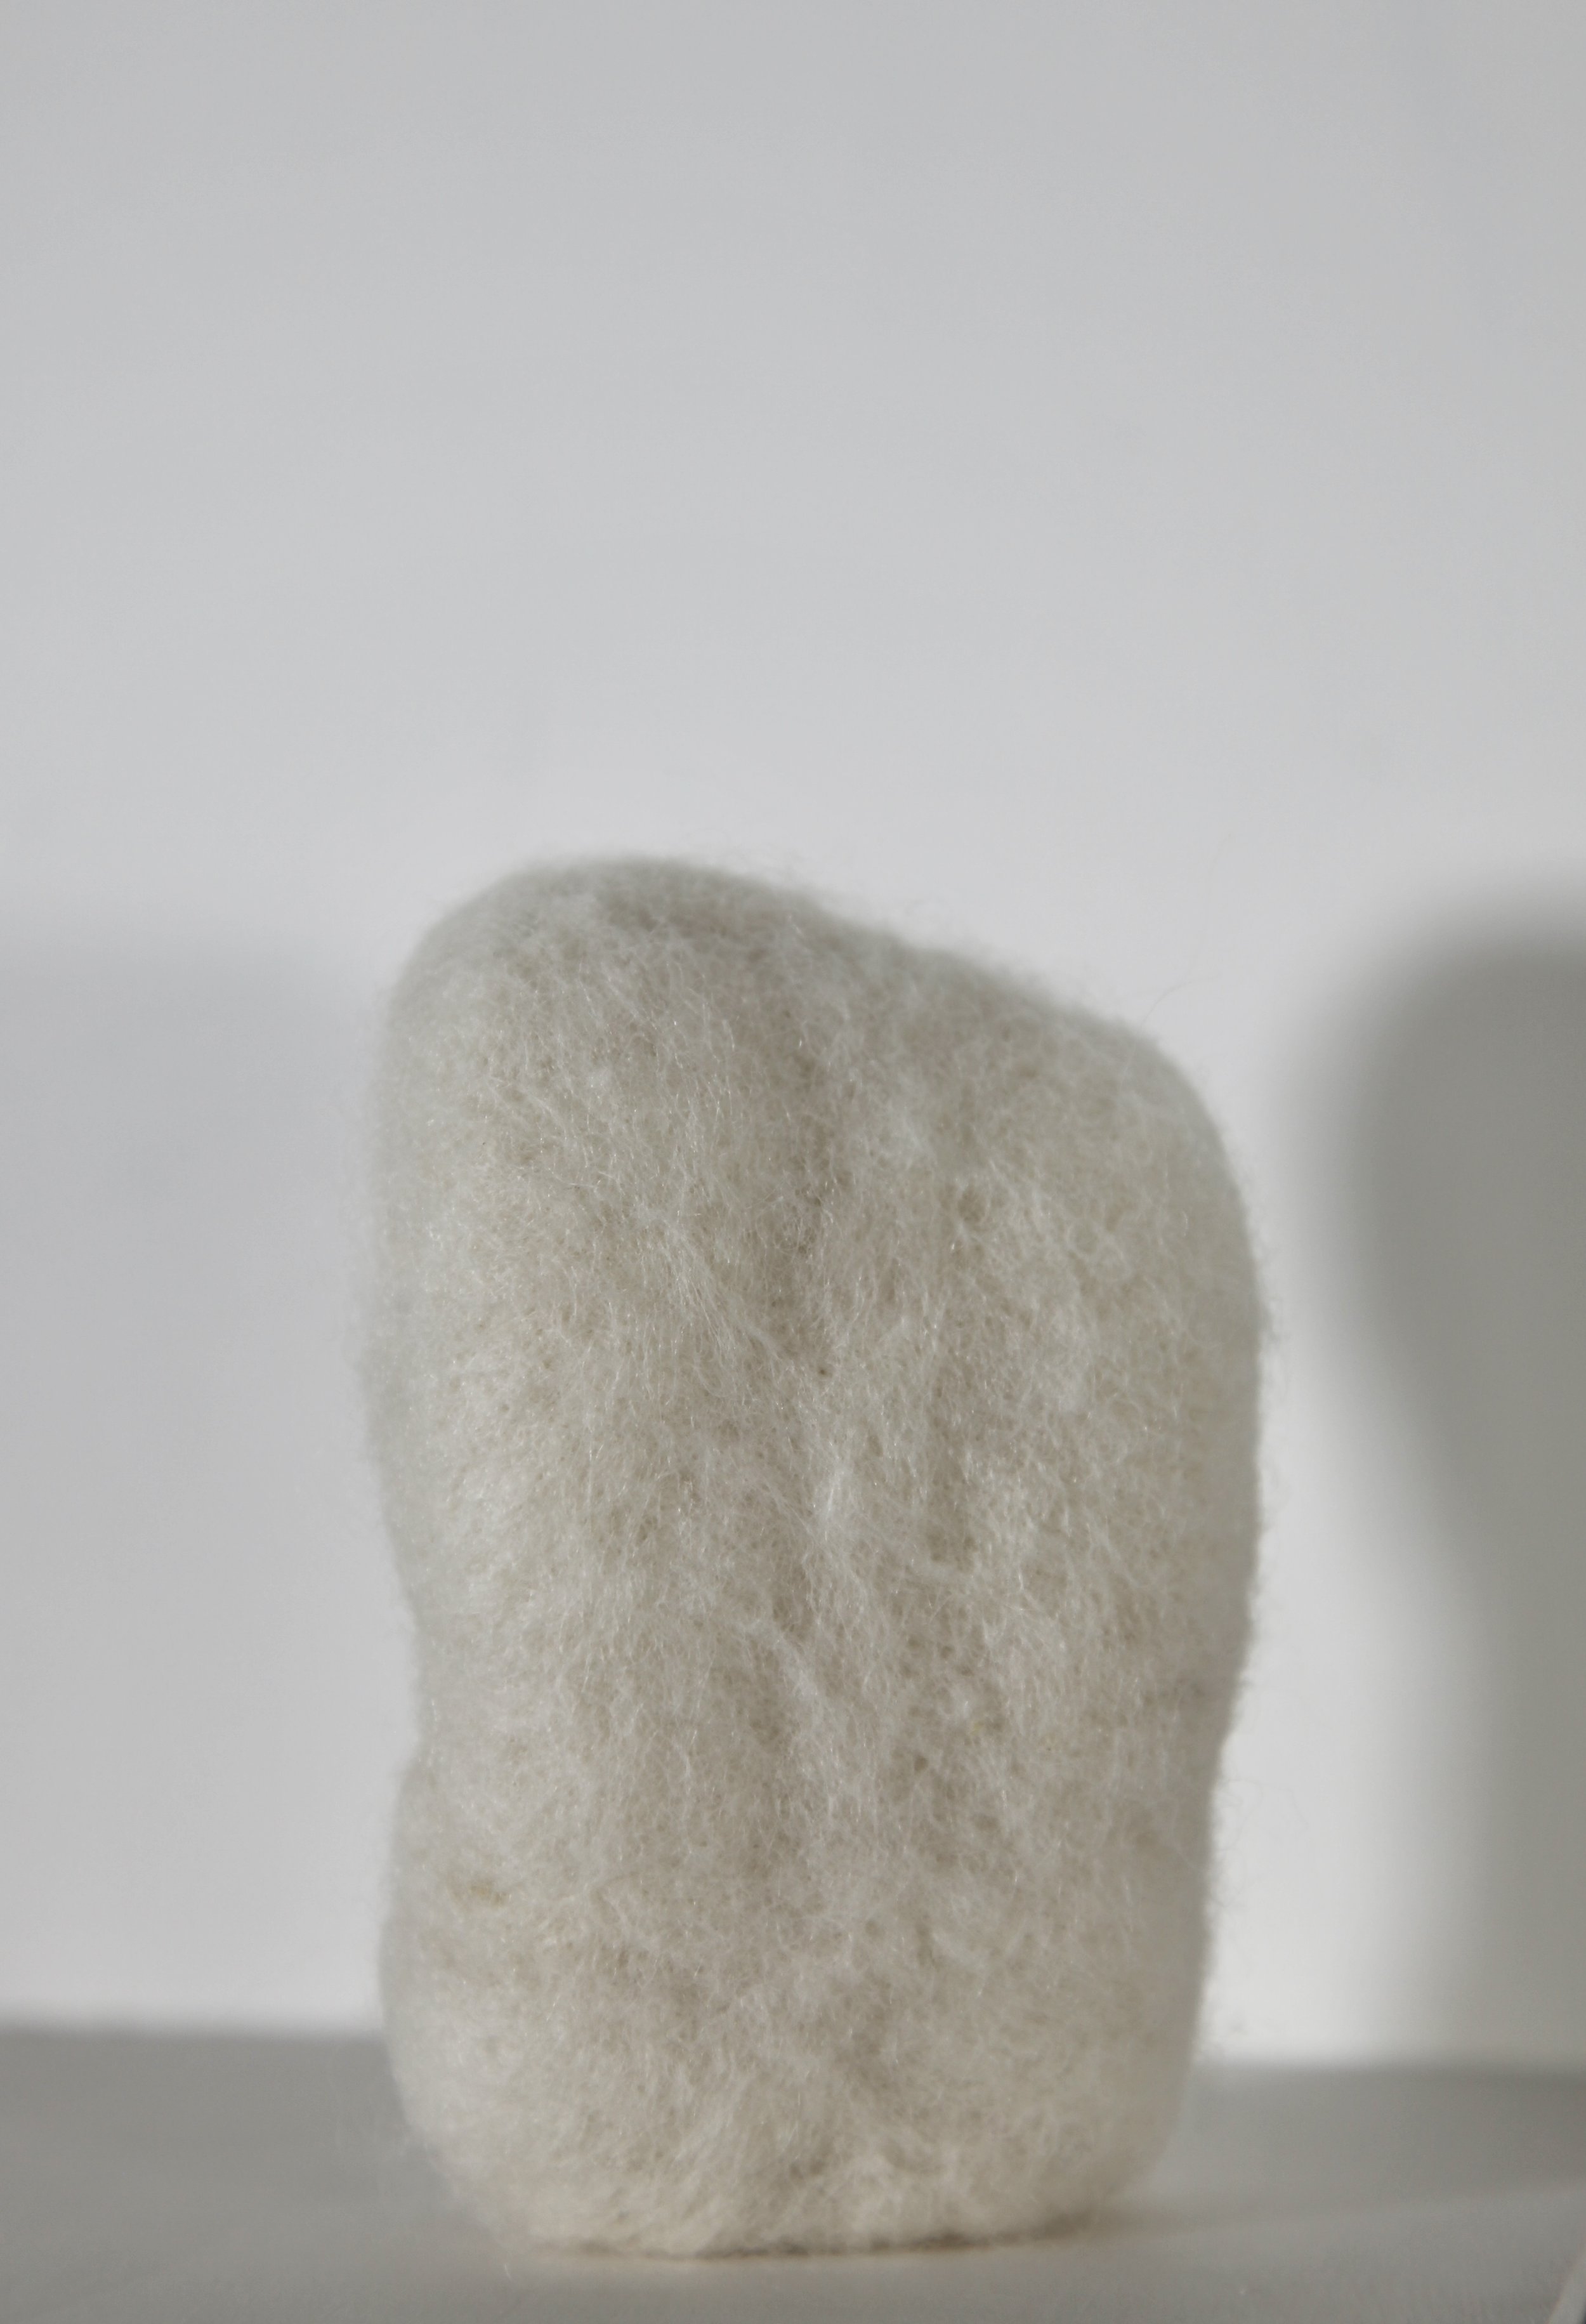   Seed,  2023, felted wool and pebble, 12 x 8cm 